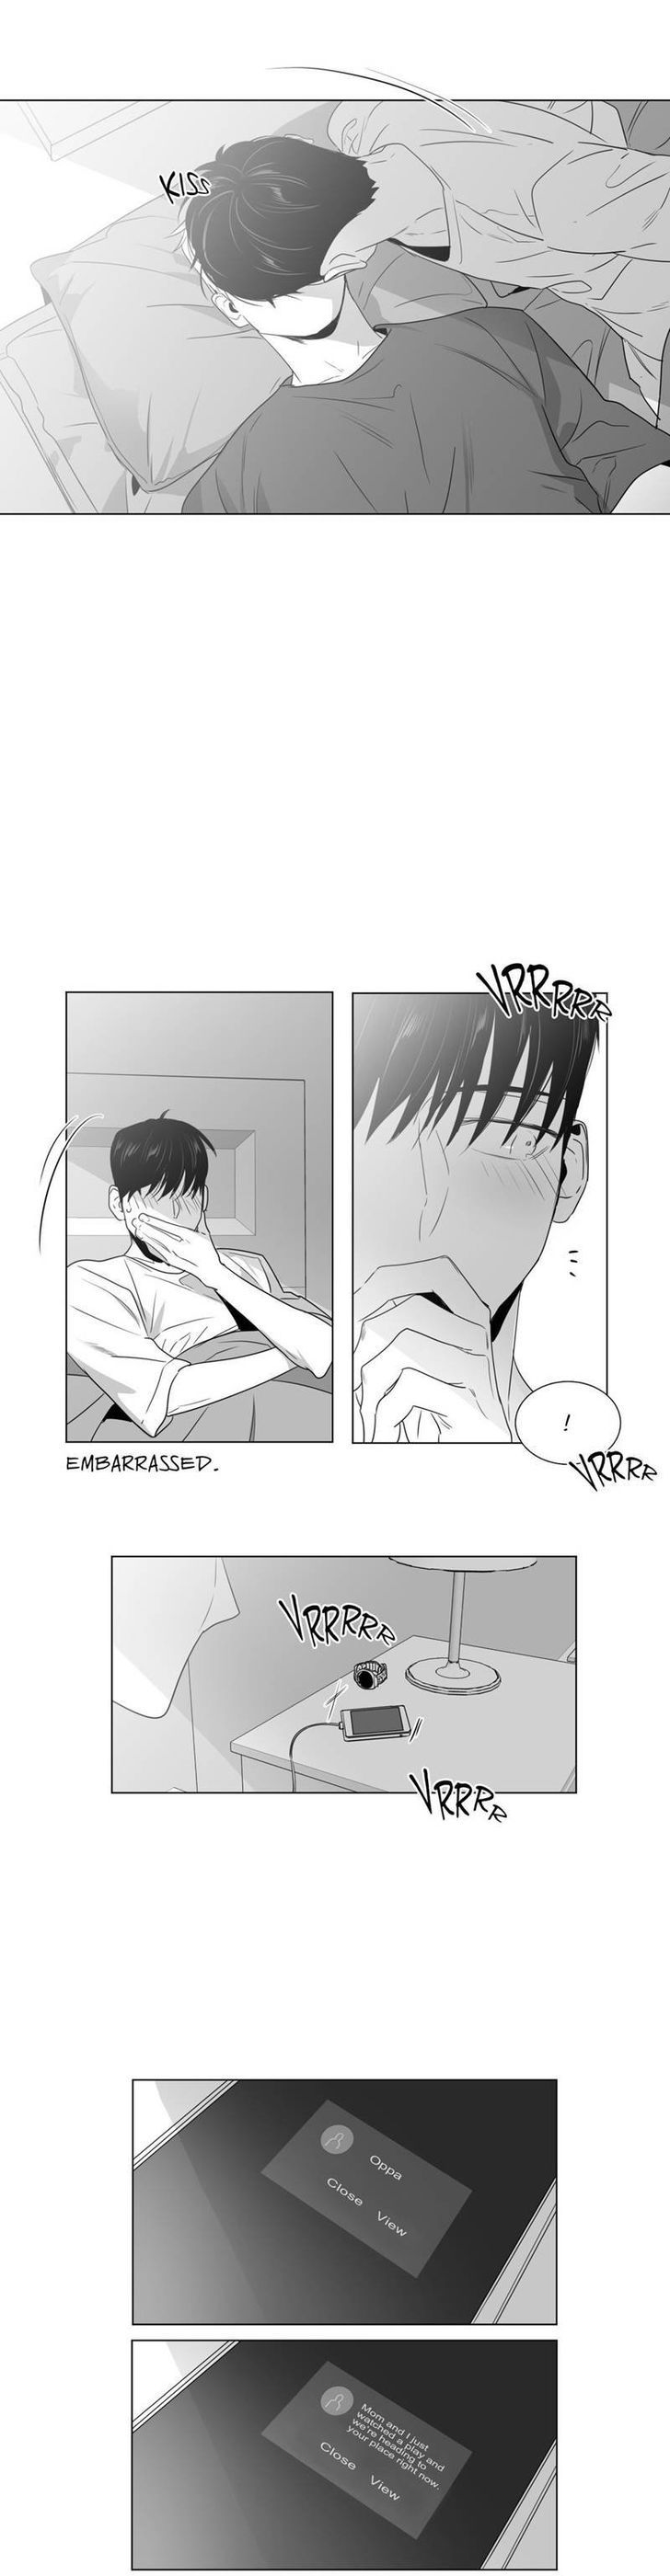 Lover Boy (Lezhin) Chapter 041 page 3